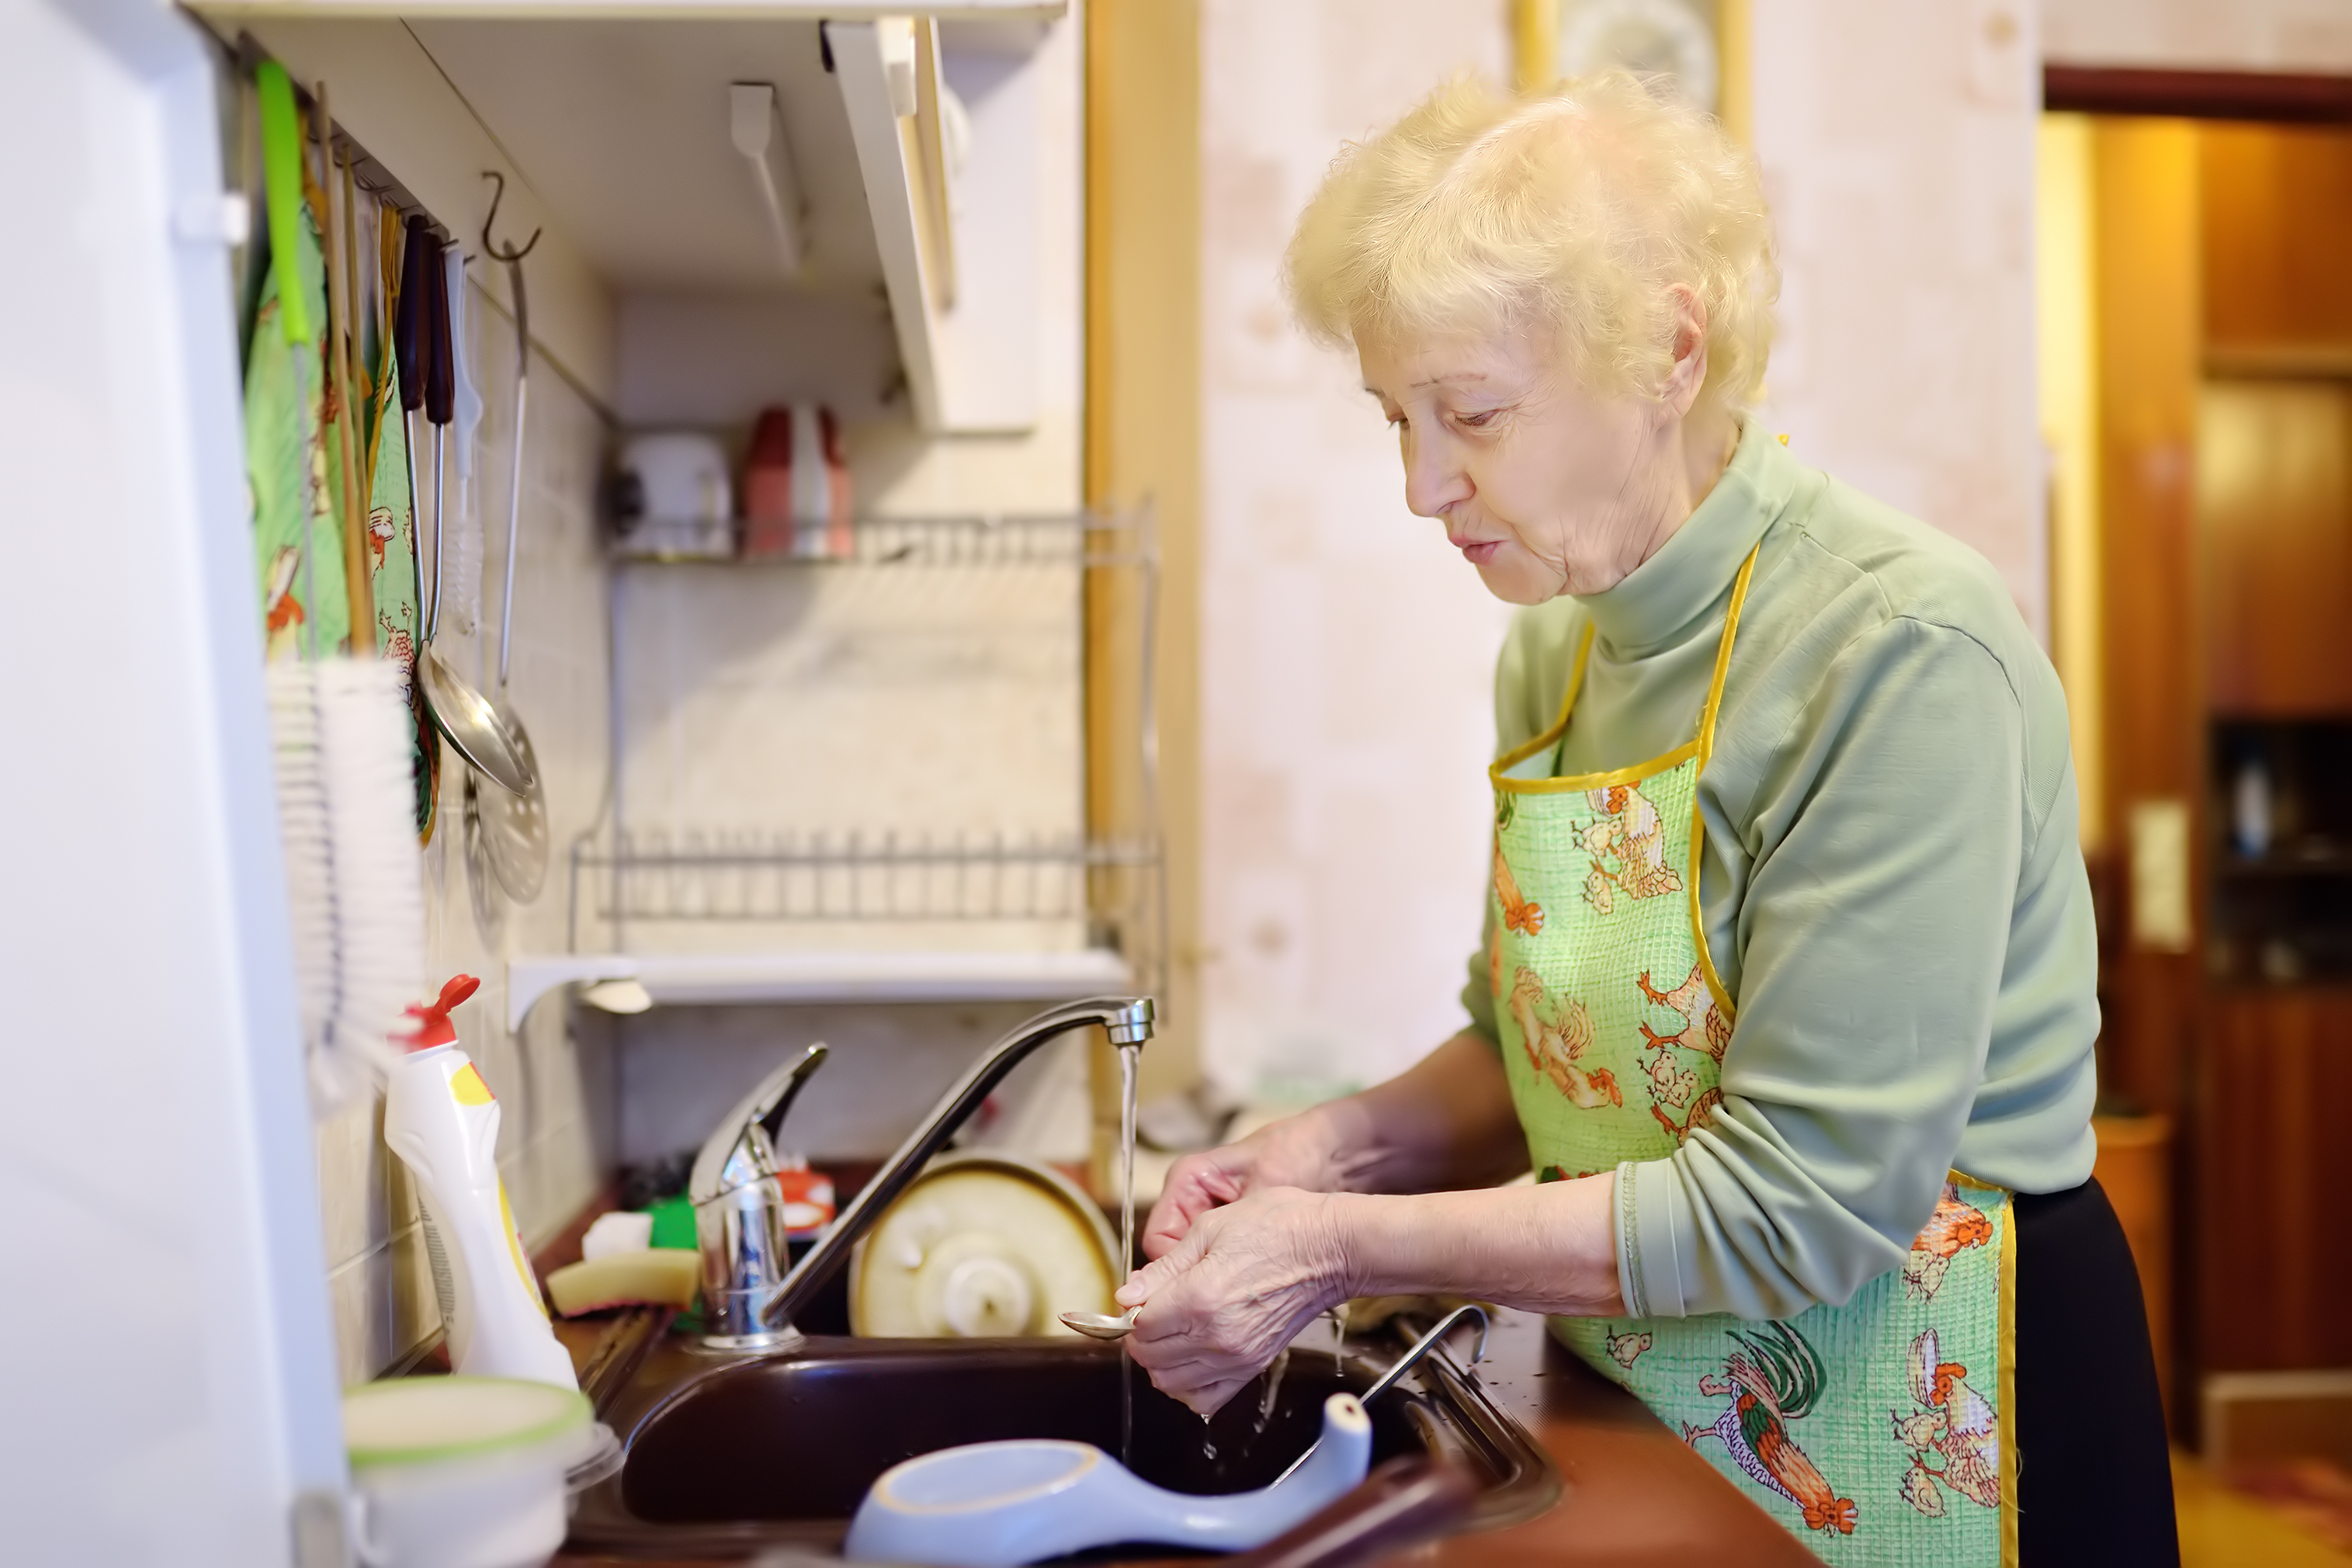 An elderly lady is washing dishes in the kitchen | Source: Shutterstock